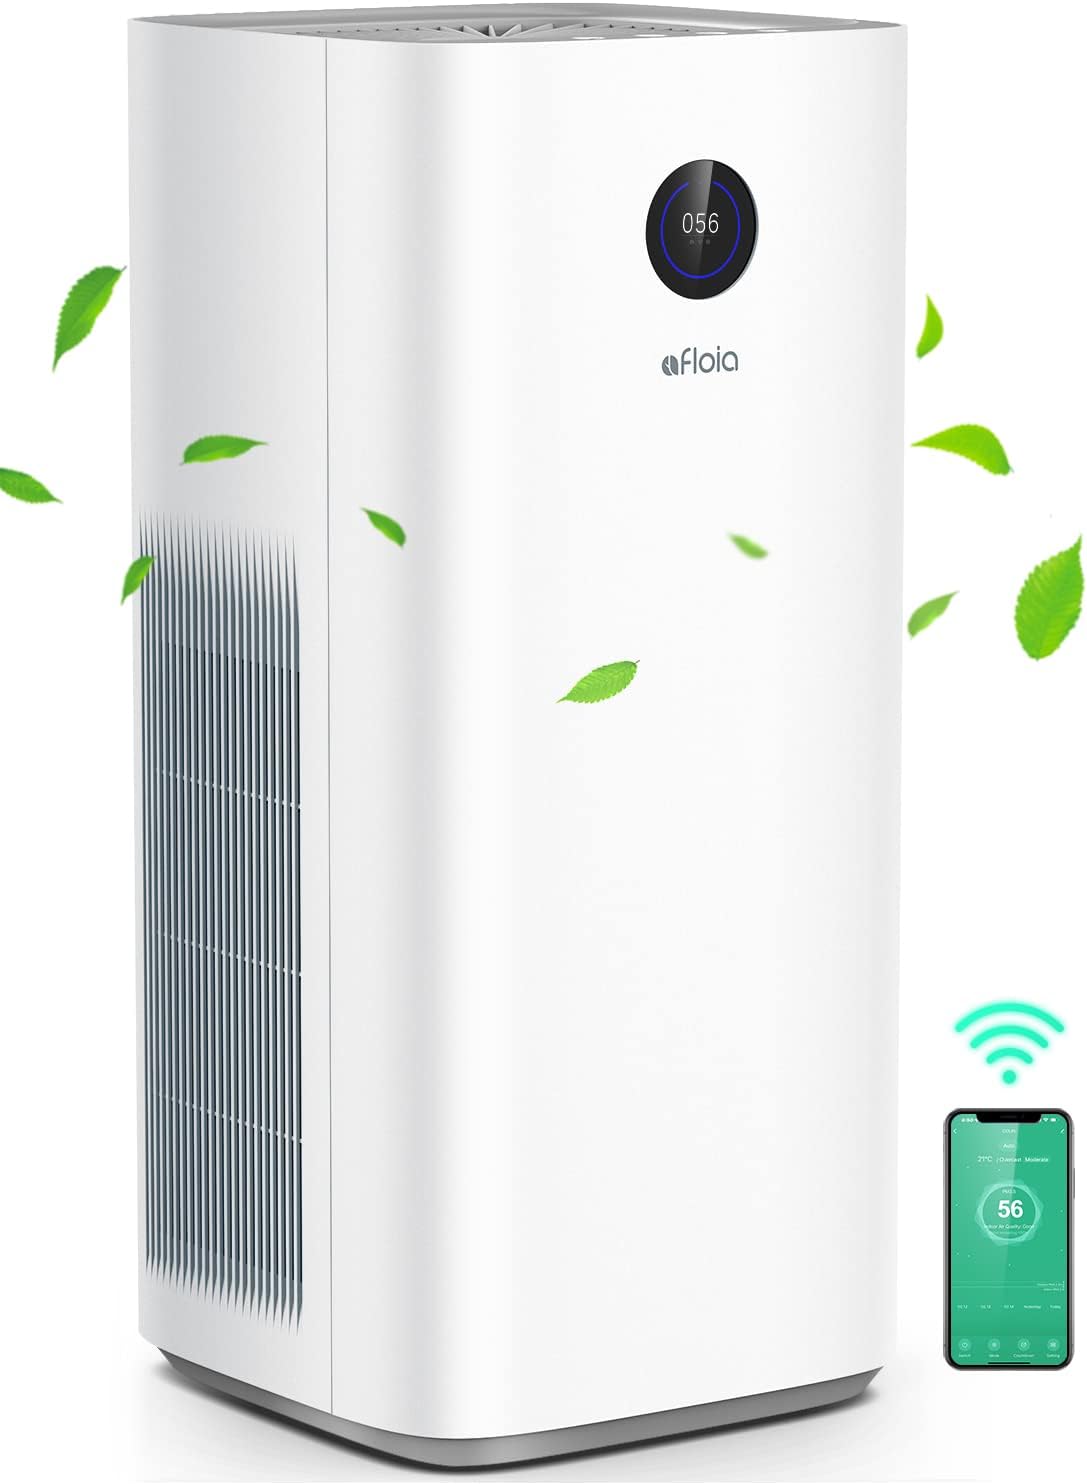 The air purifier can remove 99.9% of particles